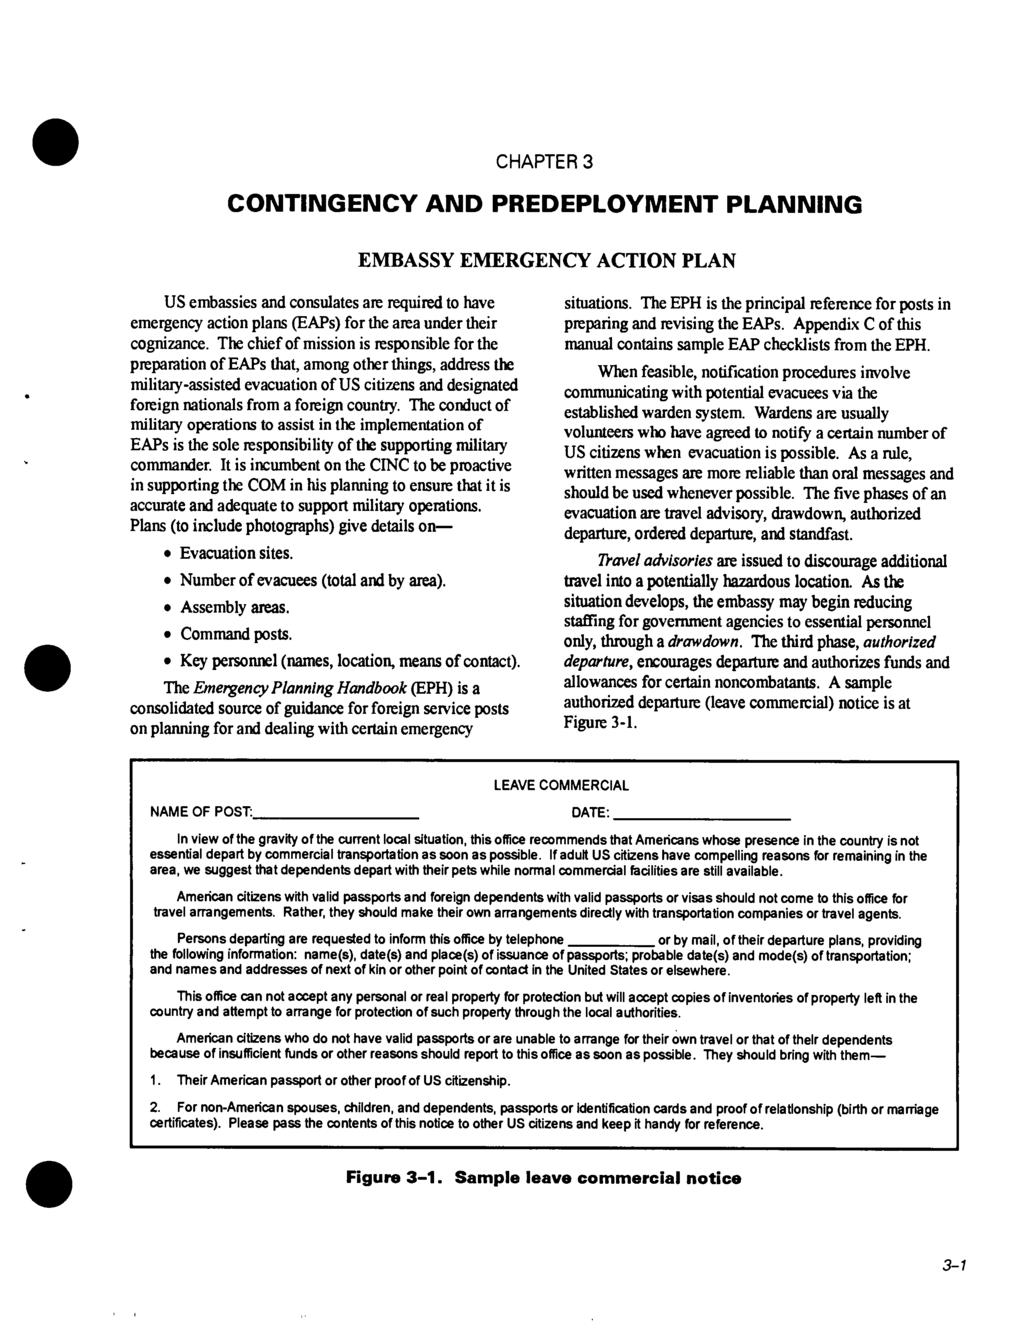 CHAPTER 3 CONTINGENCY AND PREDEPLOYMENT PLANNING EMBASSY EMERGENCY ACTION PLAN US embassies and consulates are required to have emergency action plans (EAPs) for the area under their cognizance.